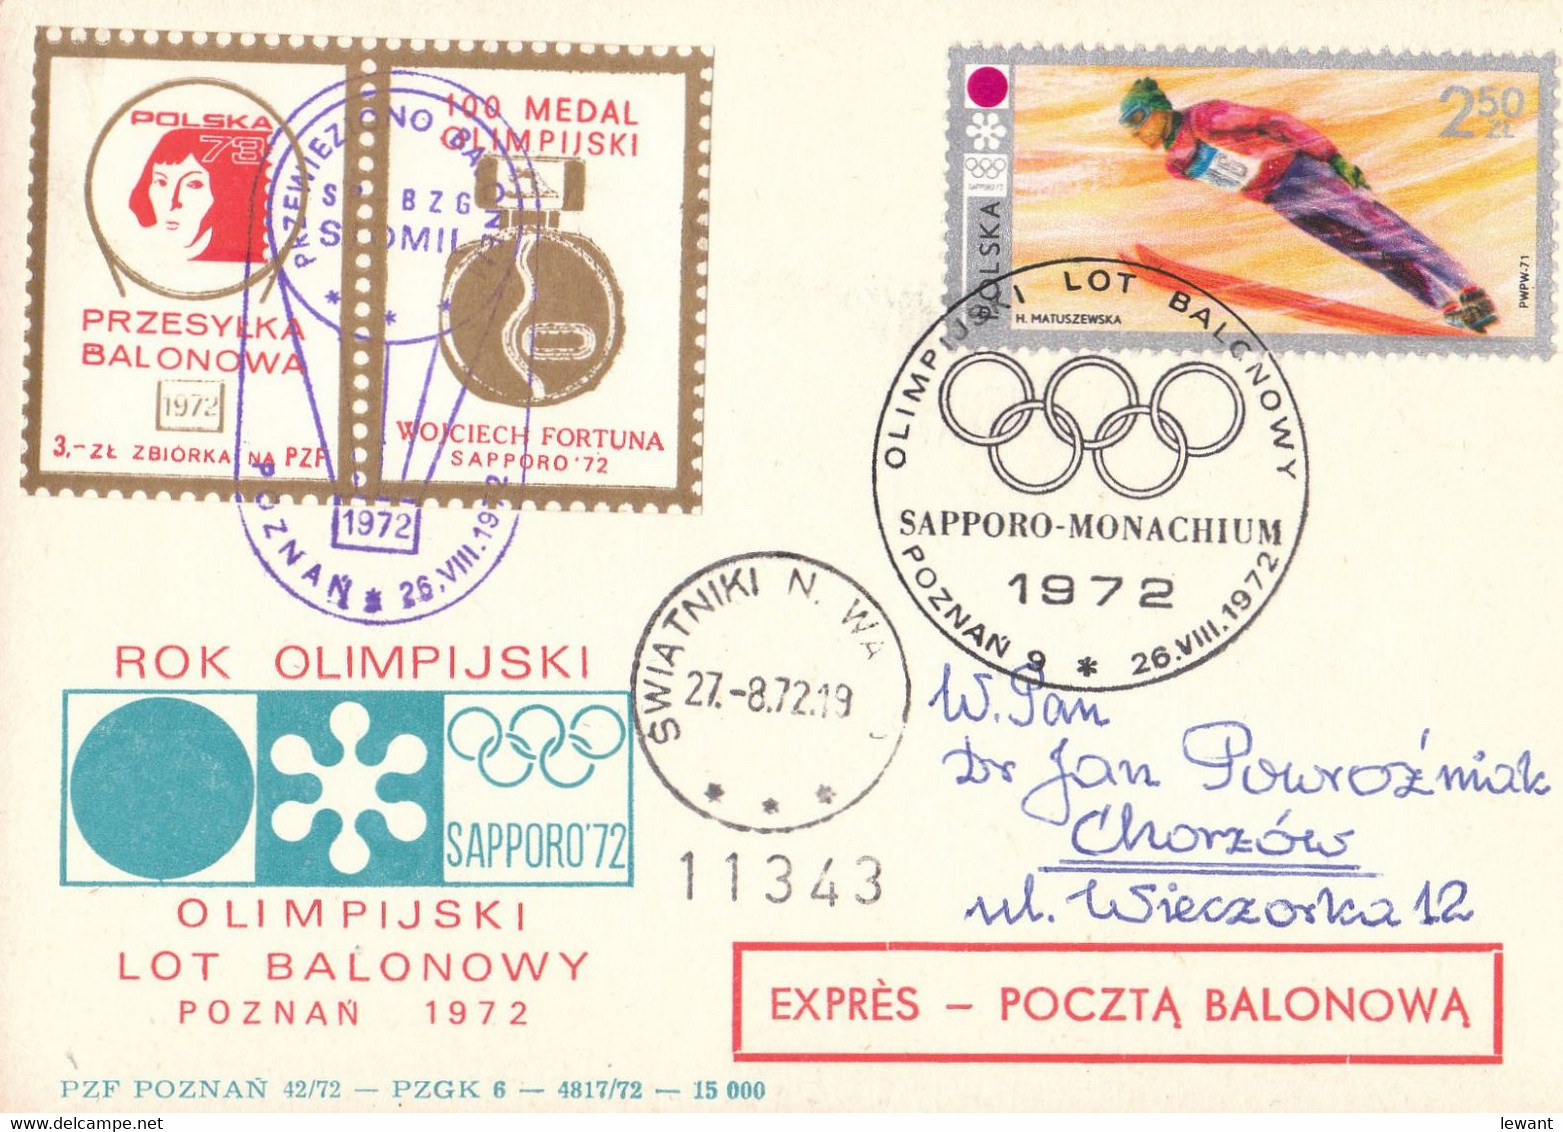 1972 ''STOMIL'' Postal Balloon With A Special Date Stamp For The Olympic Games In Sapporo And Munich (11343) POWR - Ballonpost